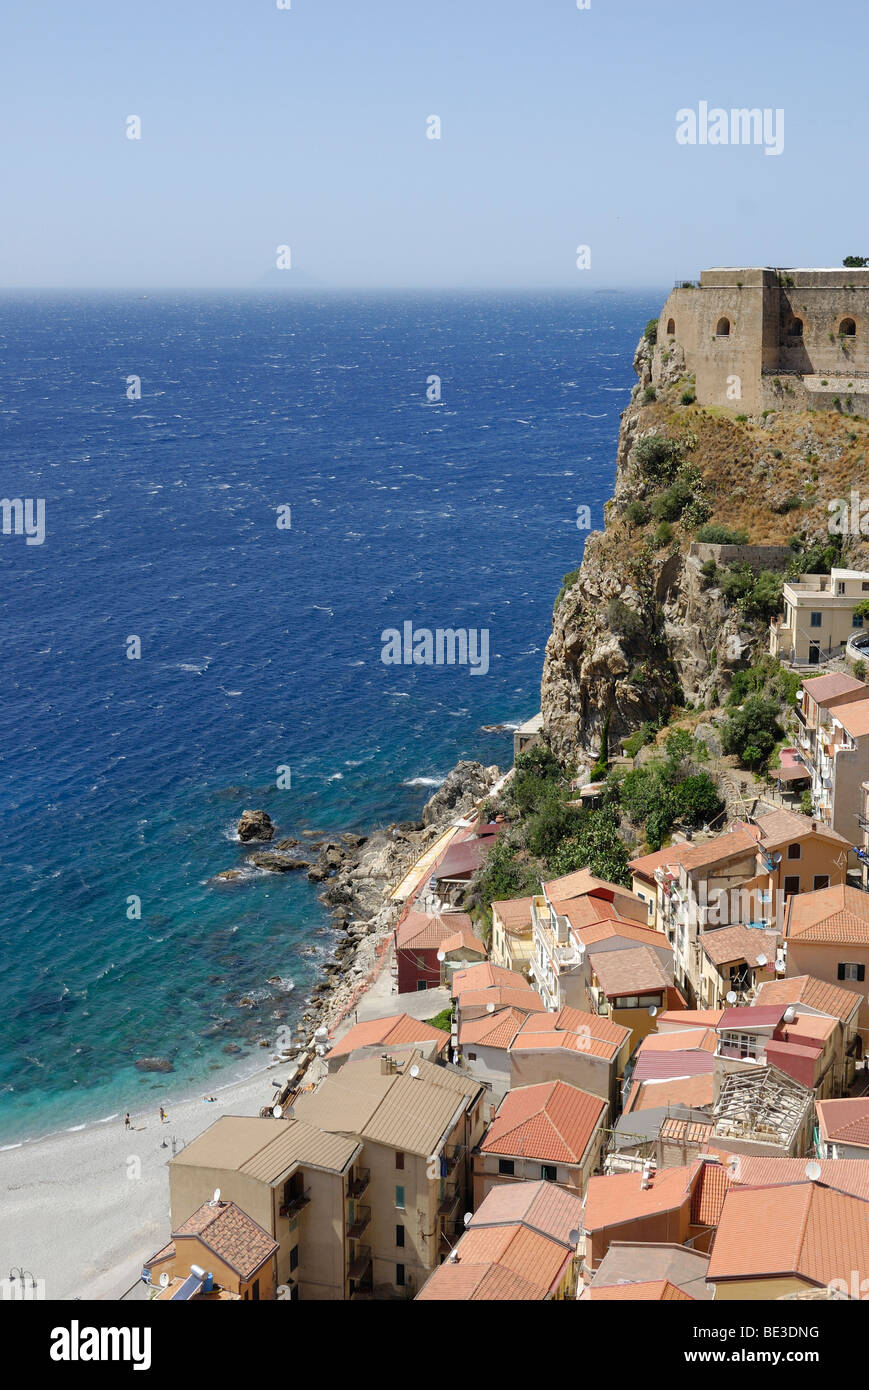 Houses and fort built on a stone cliff, on the Tyrrhenian Sea, Scilla, Calabria, South Italy, Europe Stock Photo